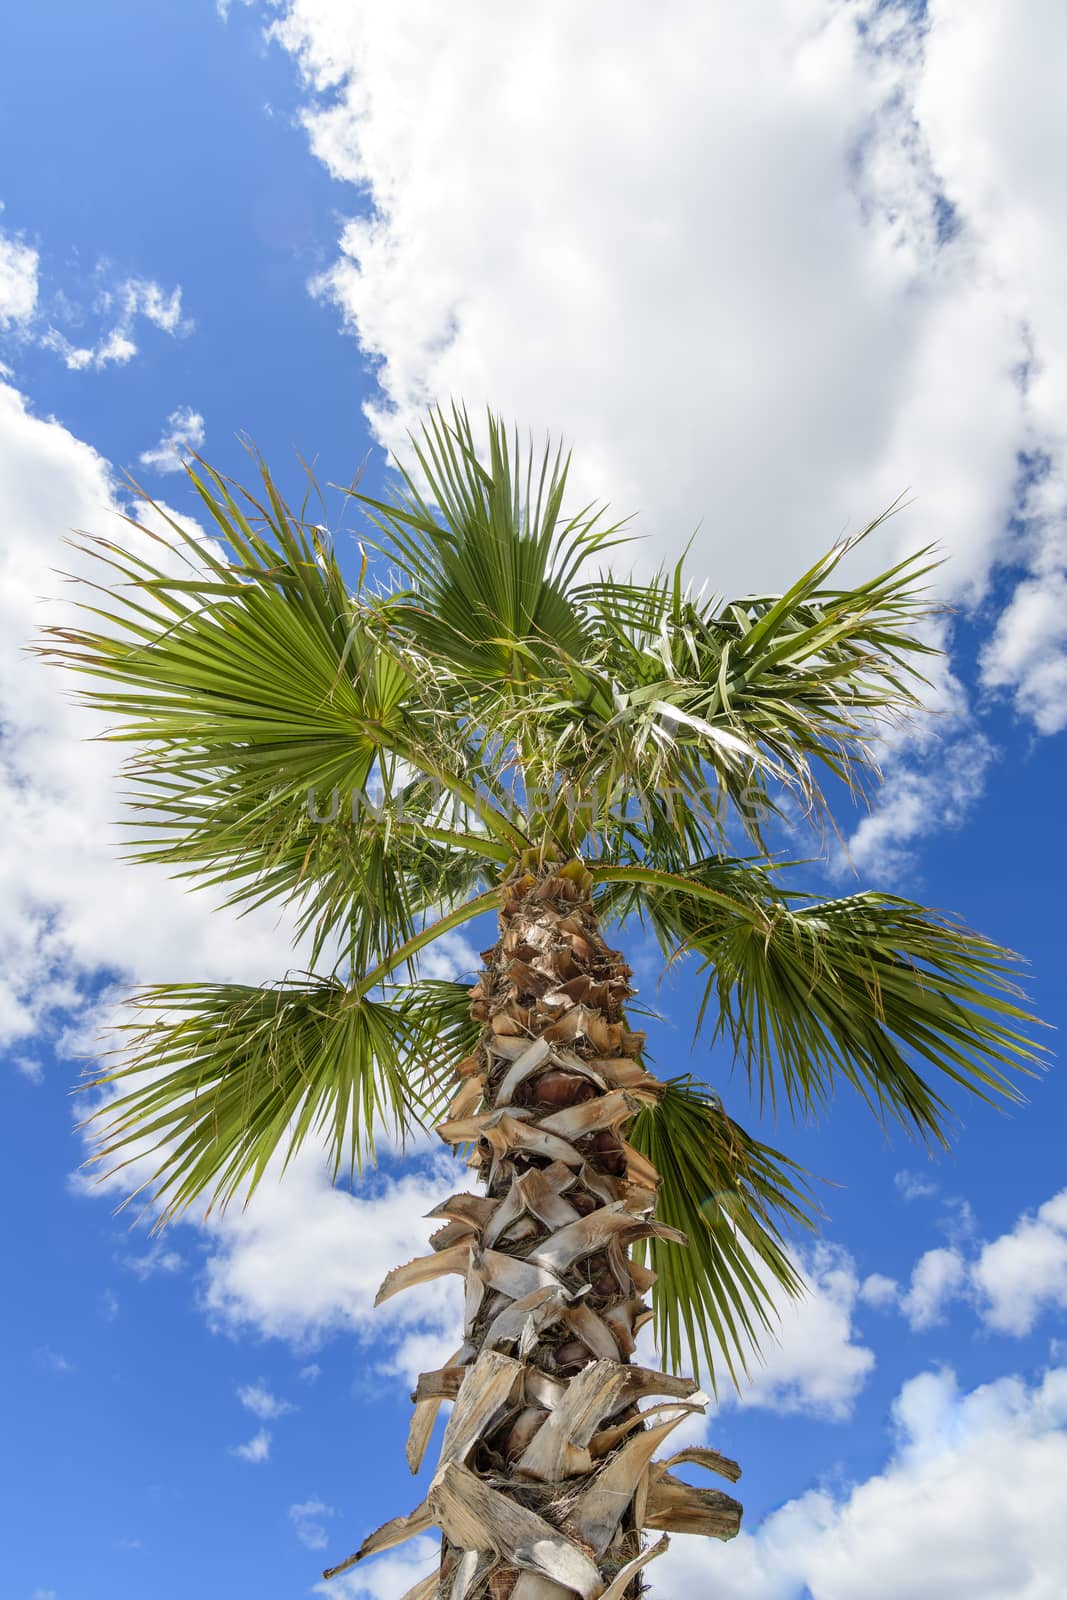 Palm tree against blue sky with white clouds in bright sunlight by asafaric